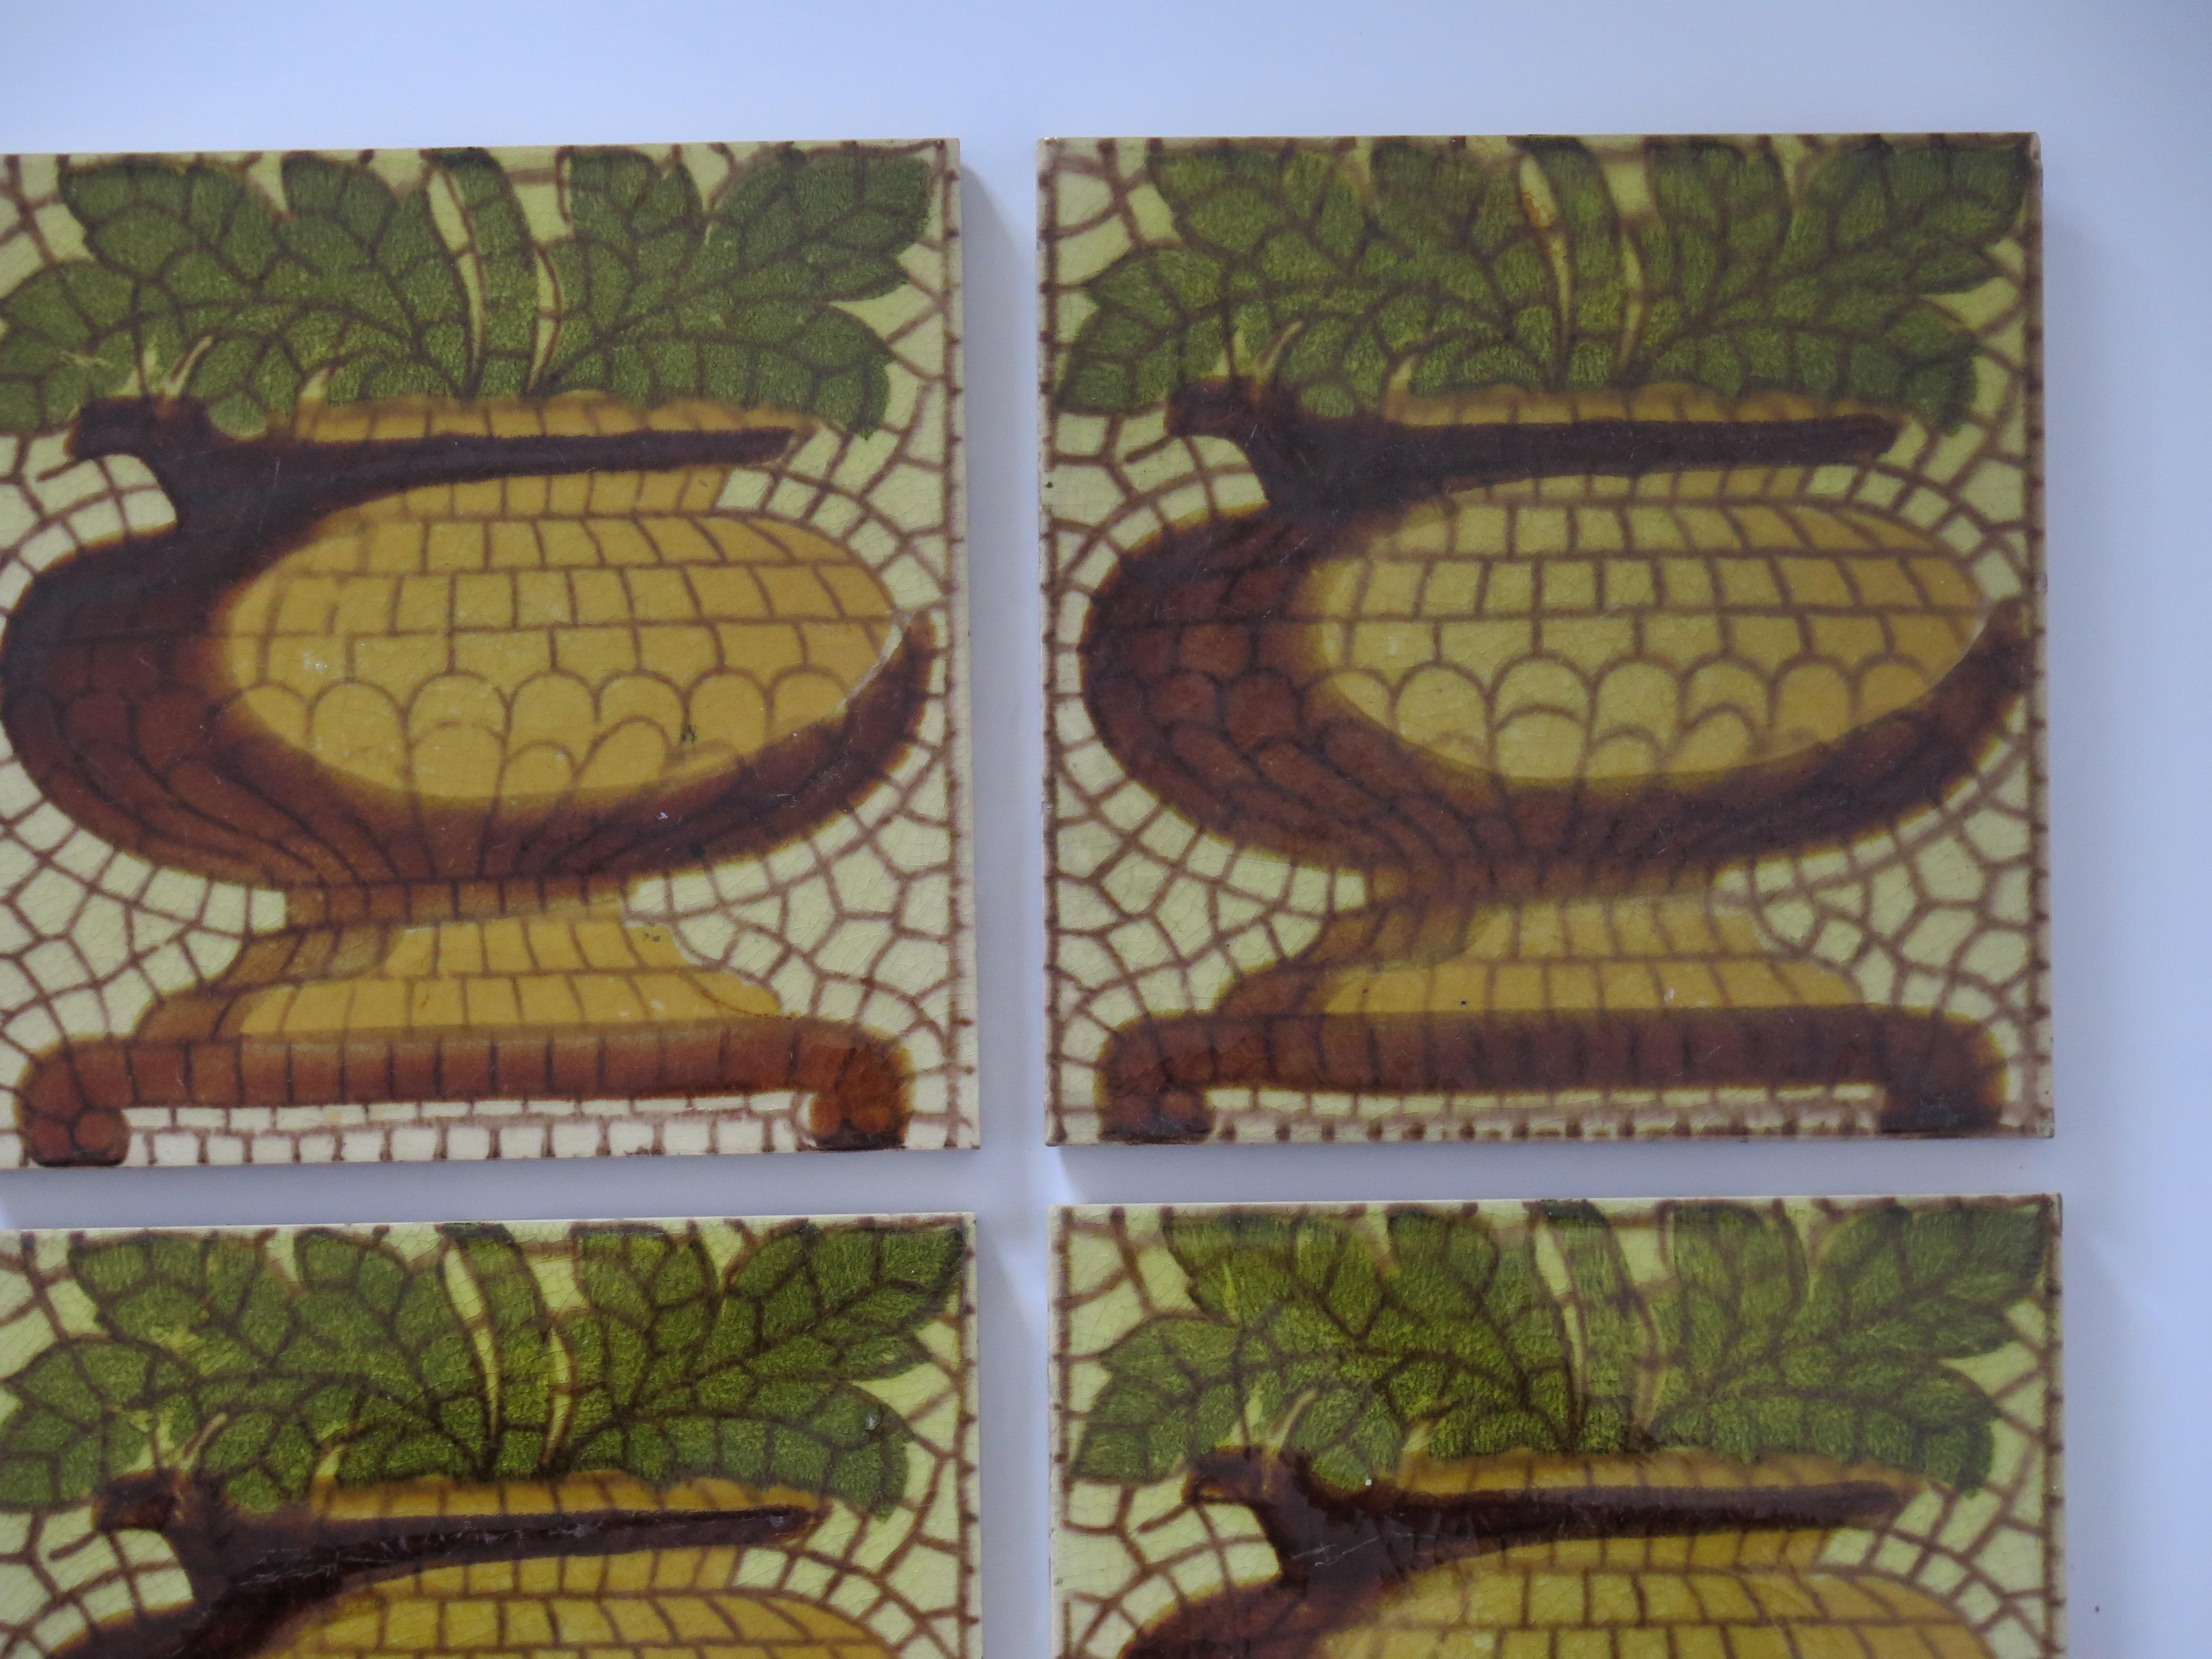 Glazed Set of SIX Ceramic Wall Tiles pineapple vase pat'n 6 inches Square,  circa 1960 For Sale